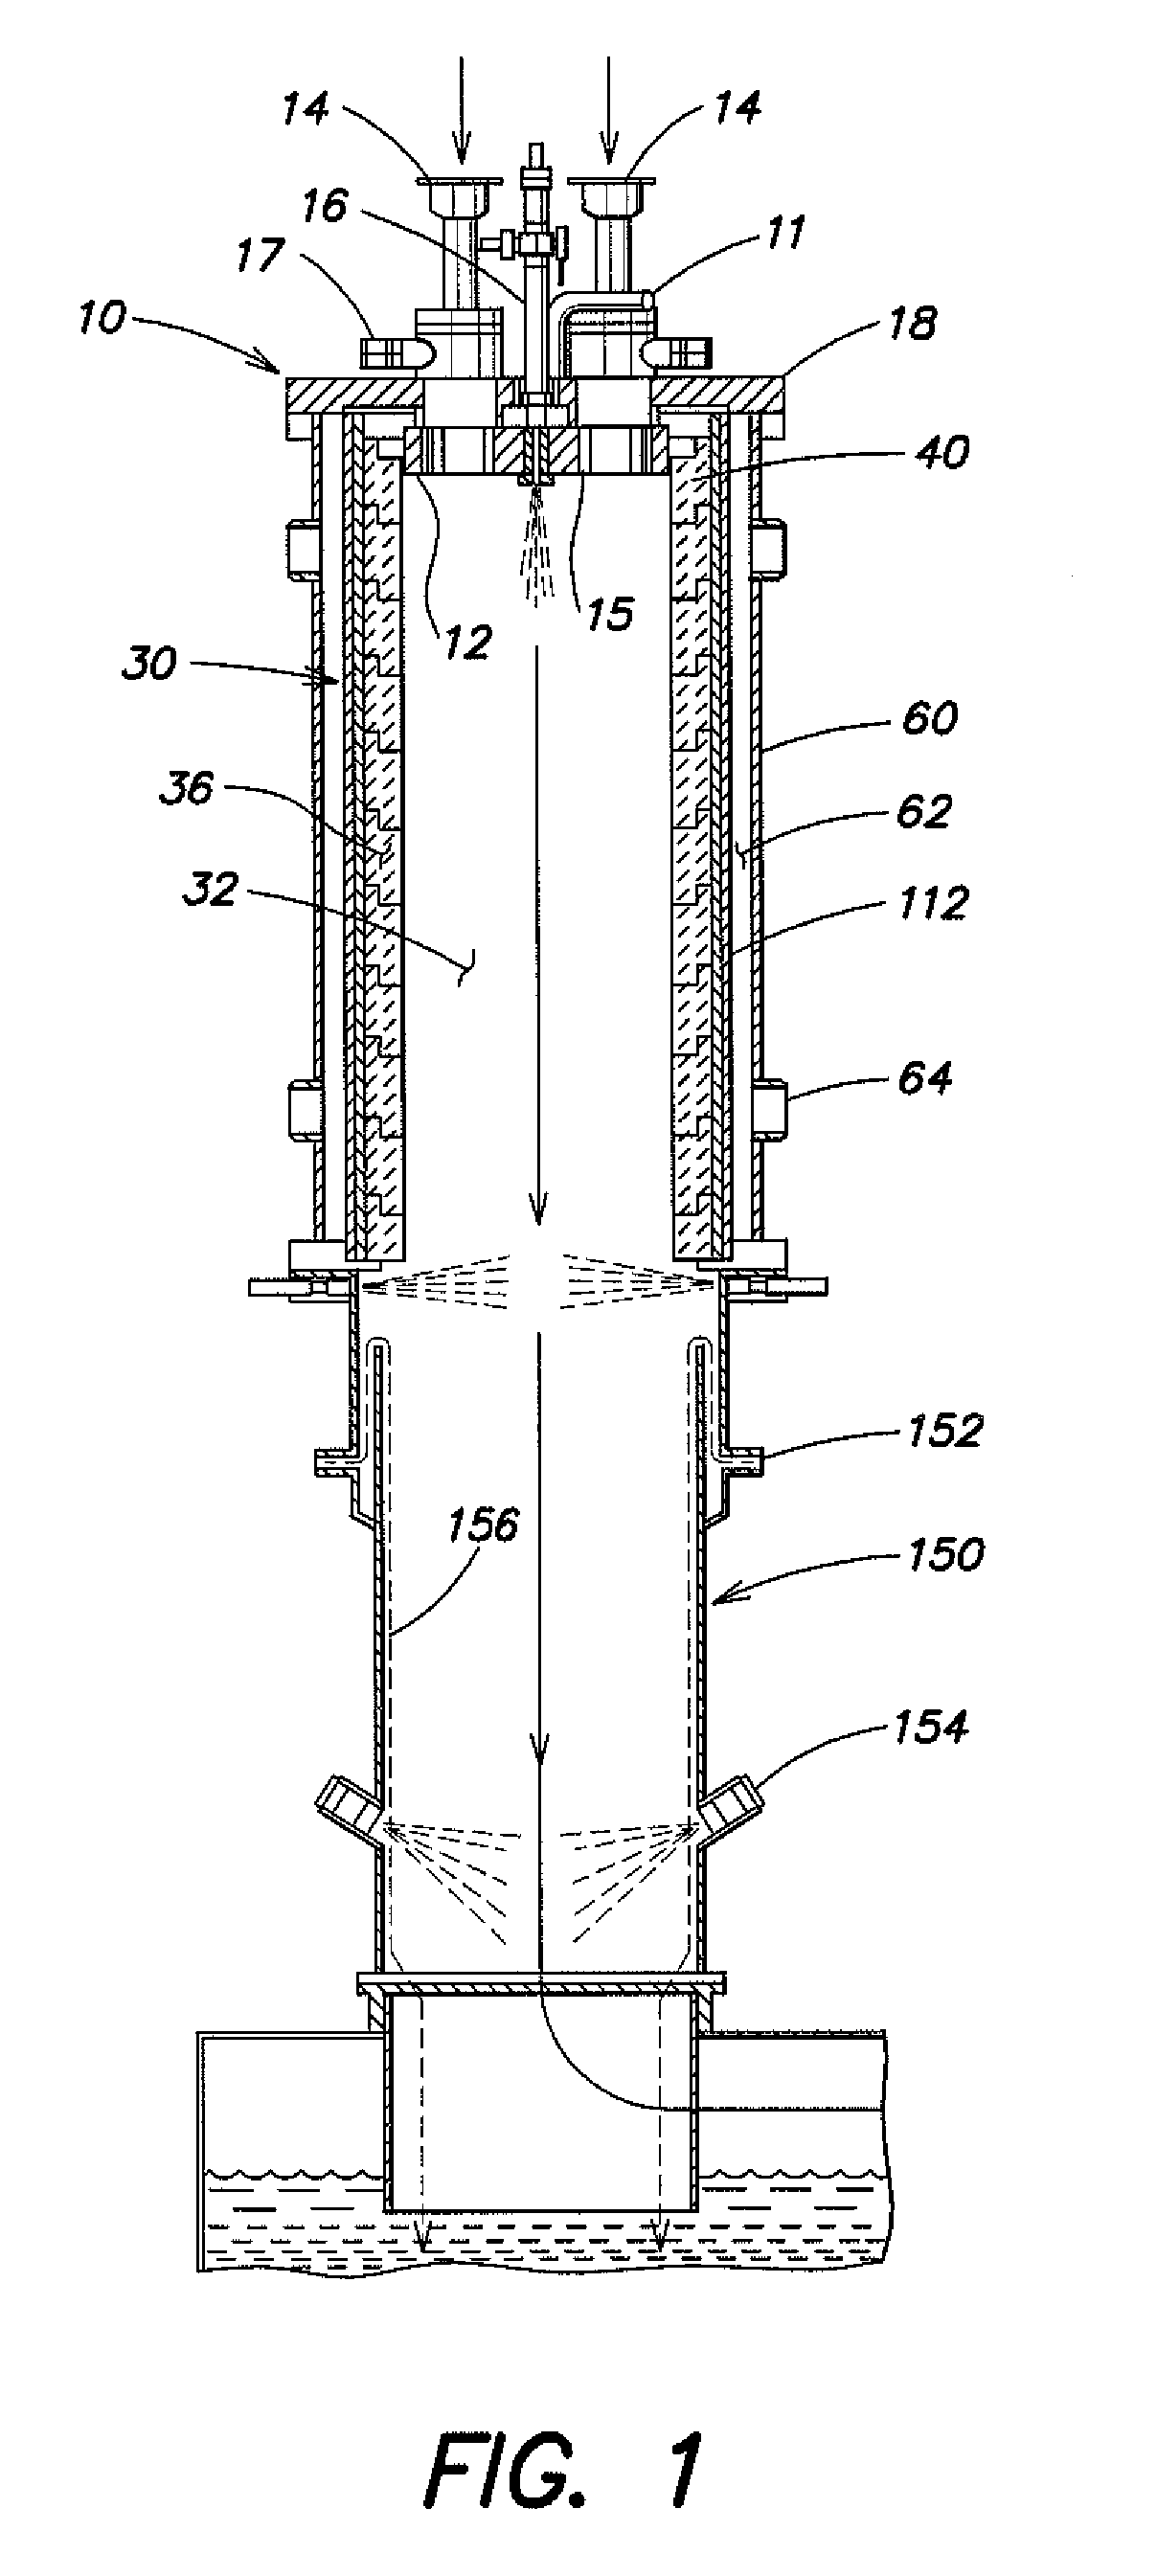 Methods and apparatus for selectively coupling process tools to abatement reactors